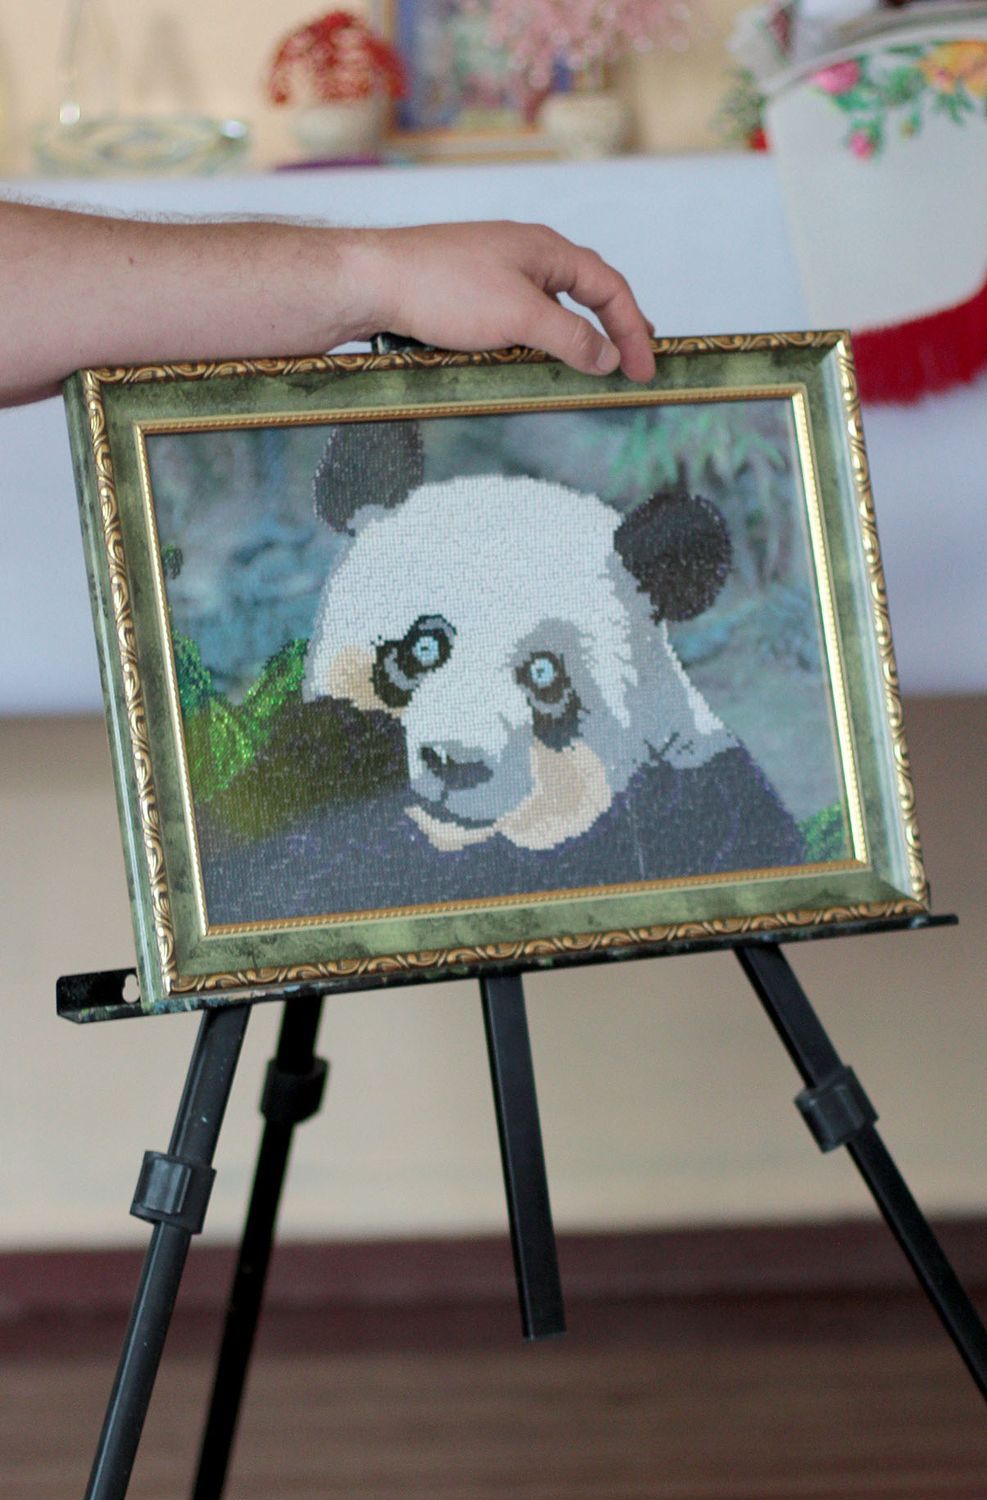 Picture for living room mosaic panda embroidered decoration nice present photo 4